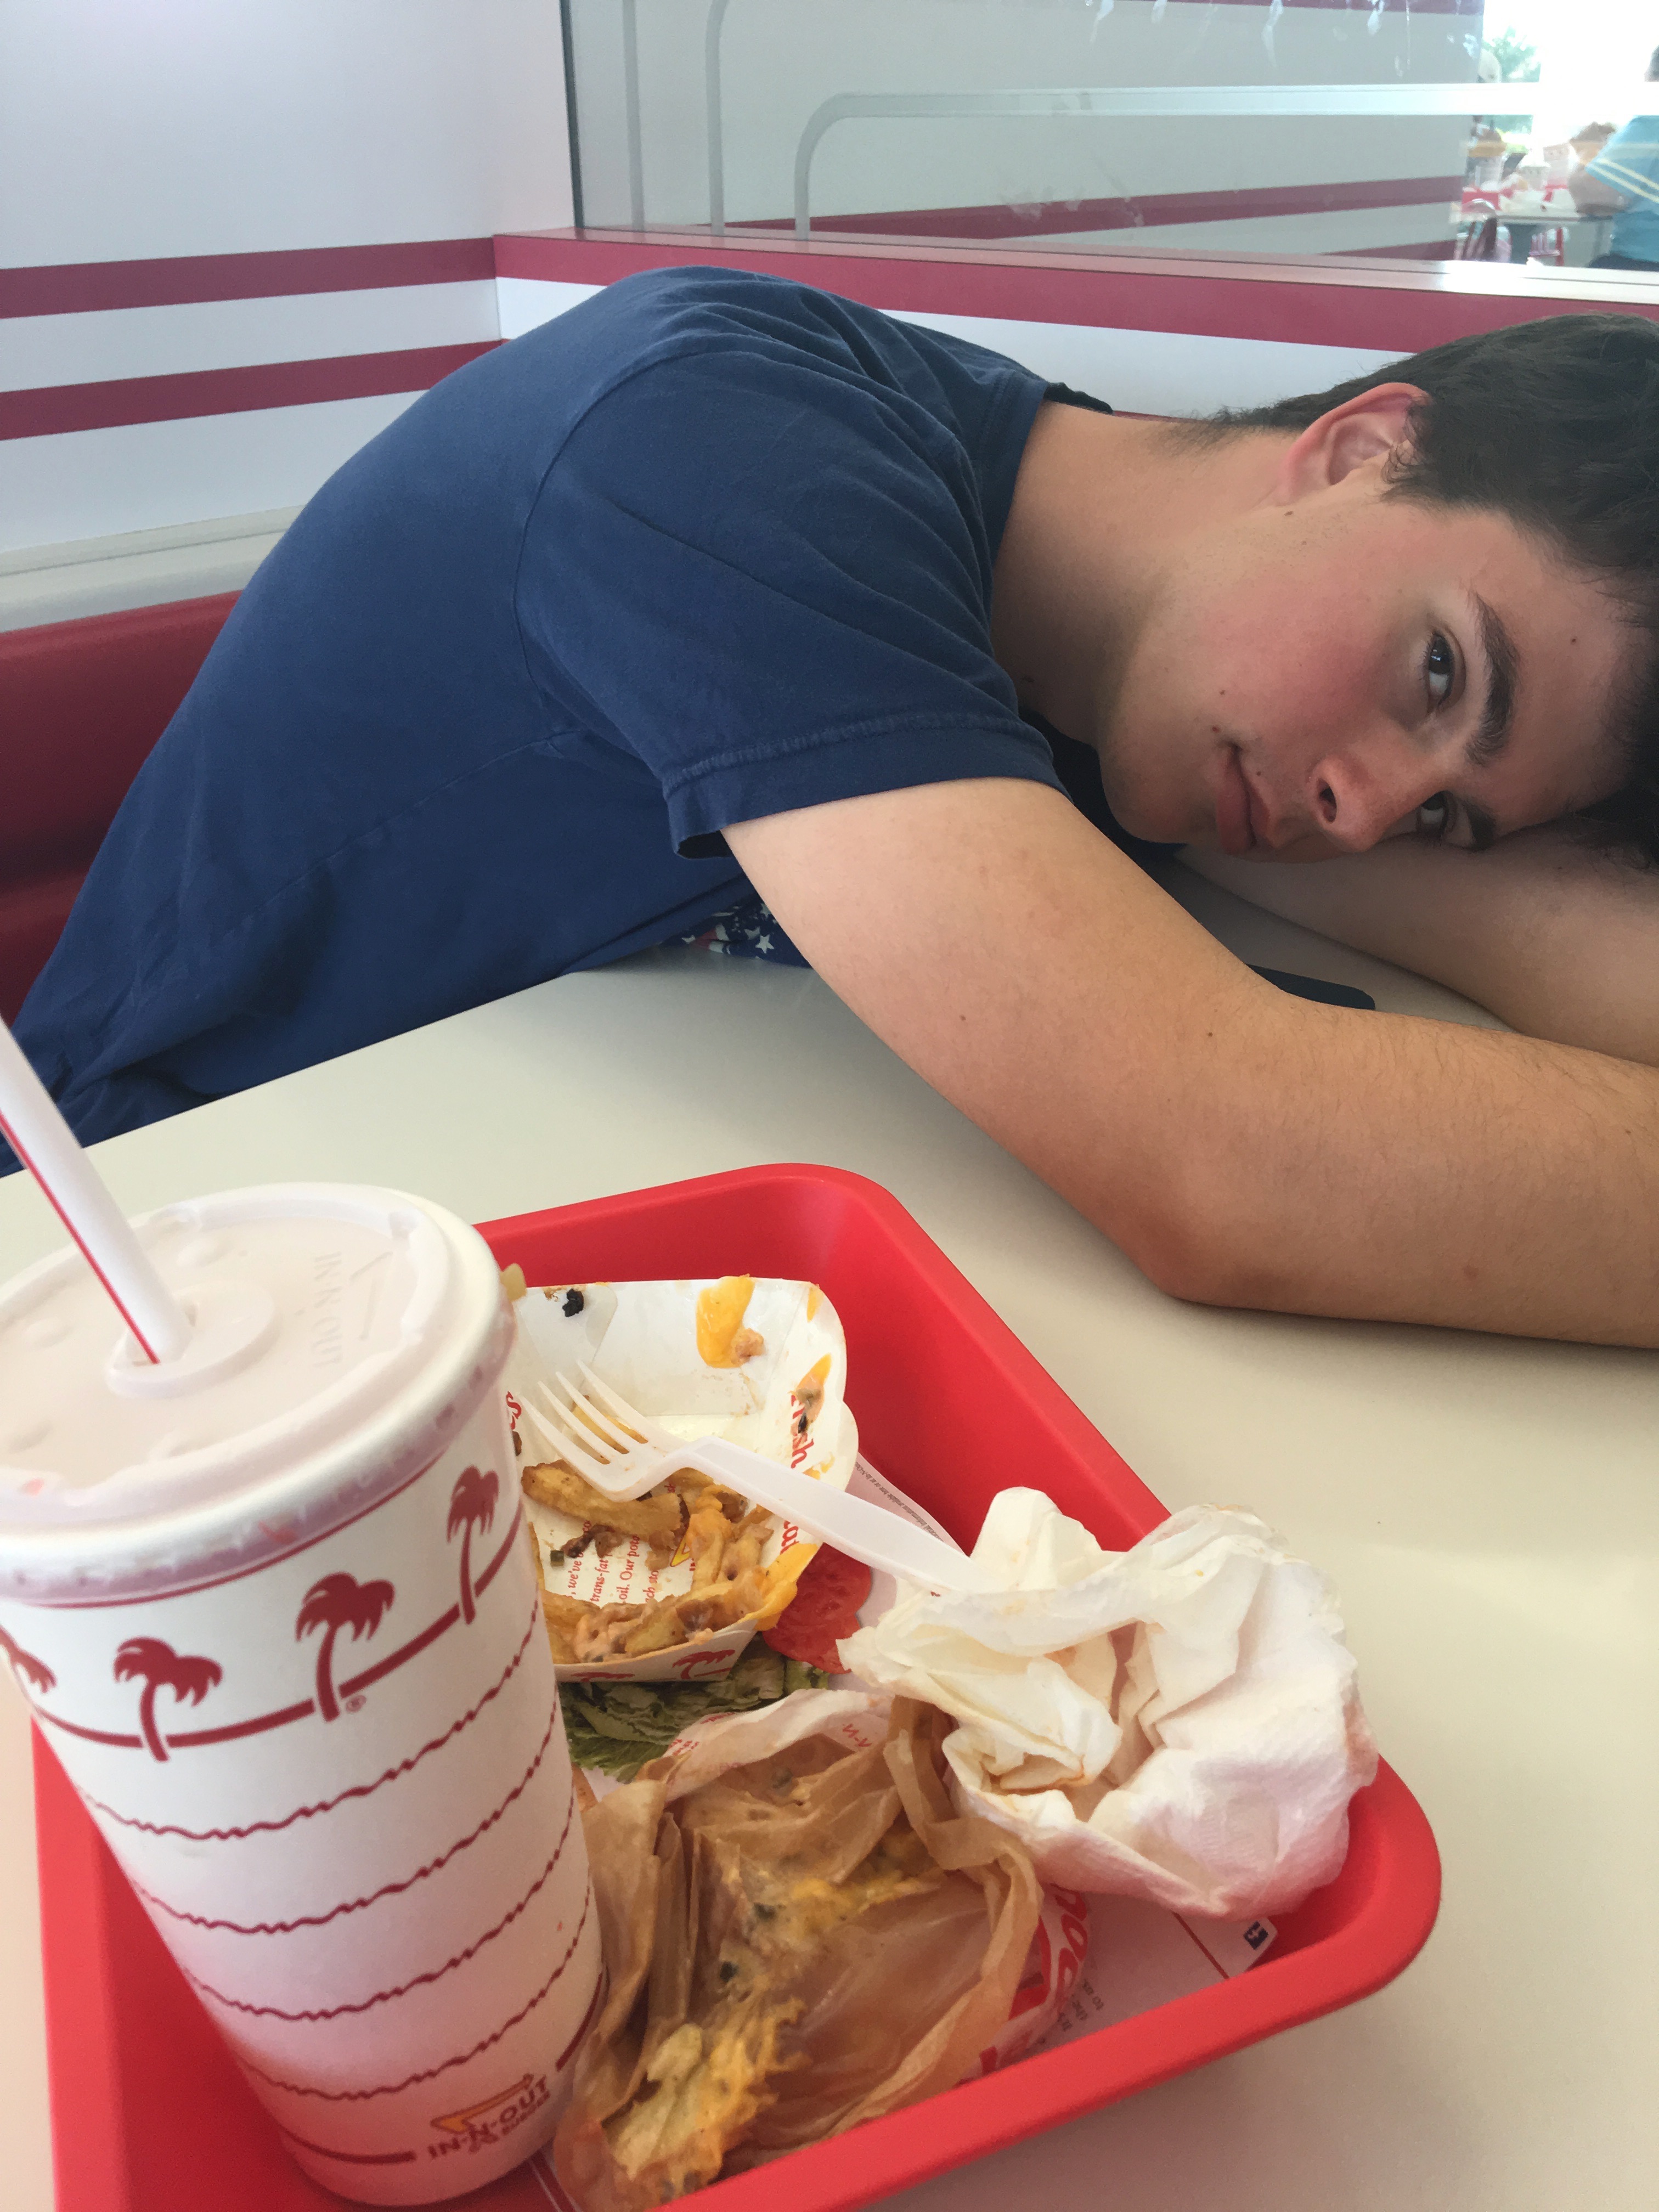 Samuel rests his head on the table next to the remains of his lunch from In-N-Out Burger.